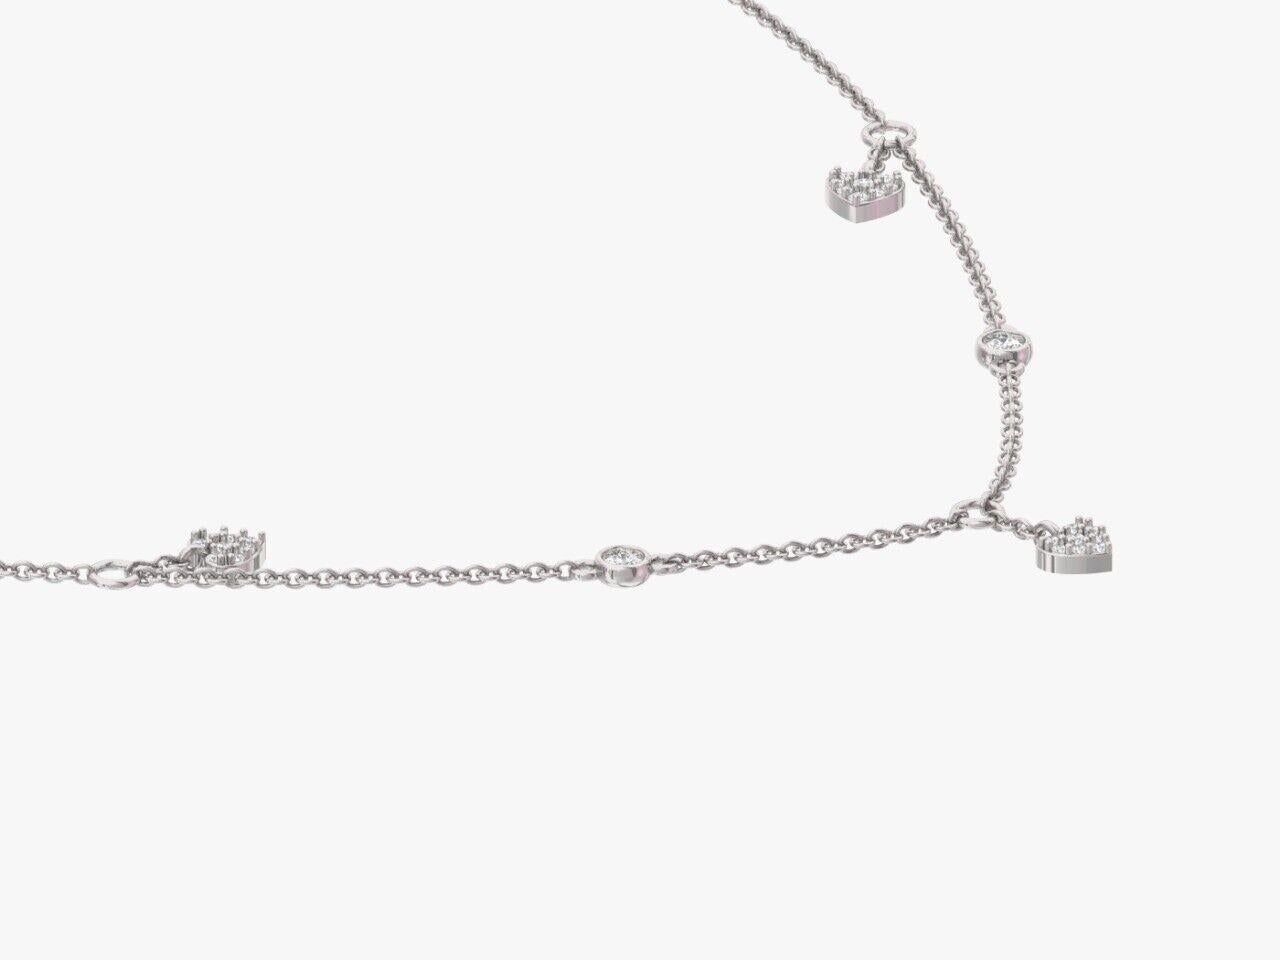 

High jewellery designer piece right from heart of London Hatton Garden

18 inch long chain fully embellished with VS clarity sparkling solitaire station diamonds and dangling heart charms totalling 1ct

Diamond Carat: 1ct

Colour: G

Clarity: